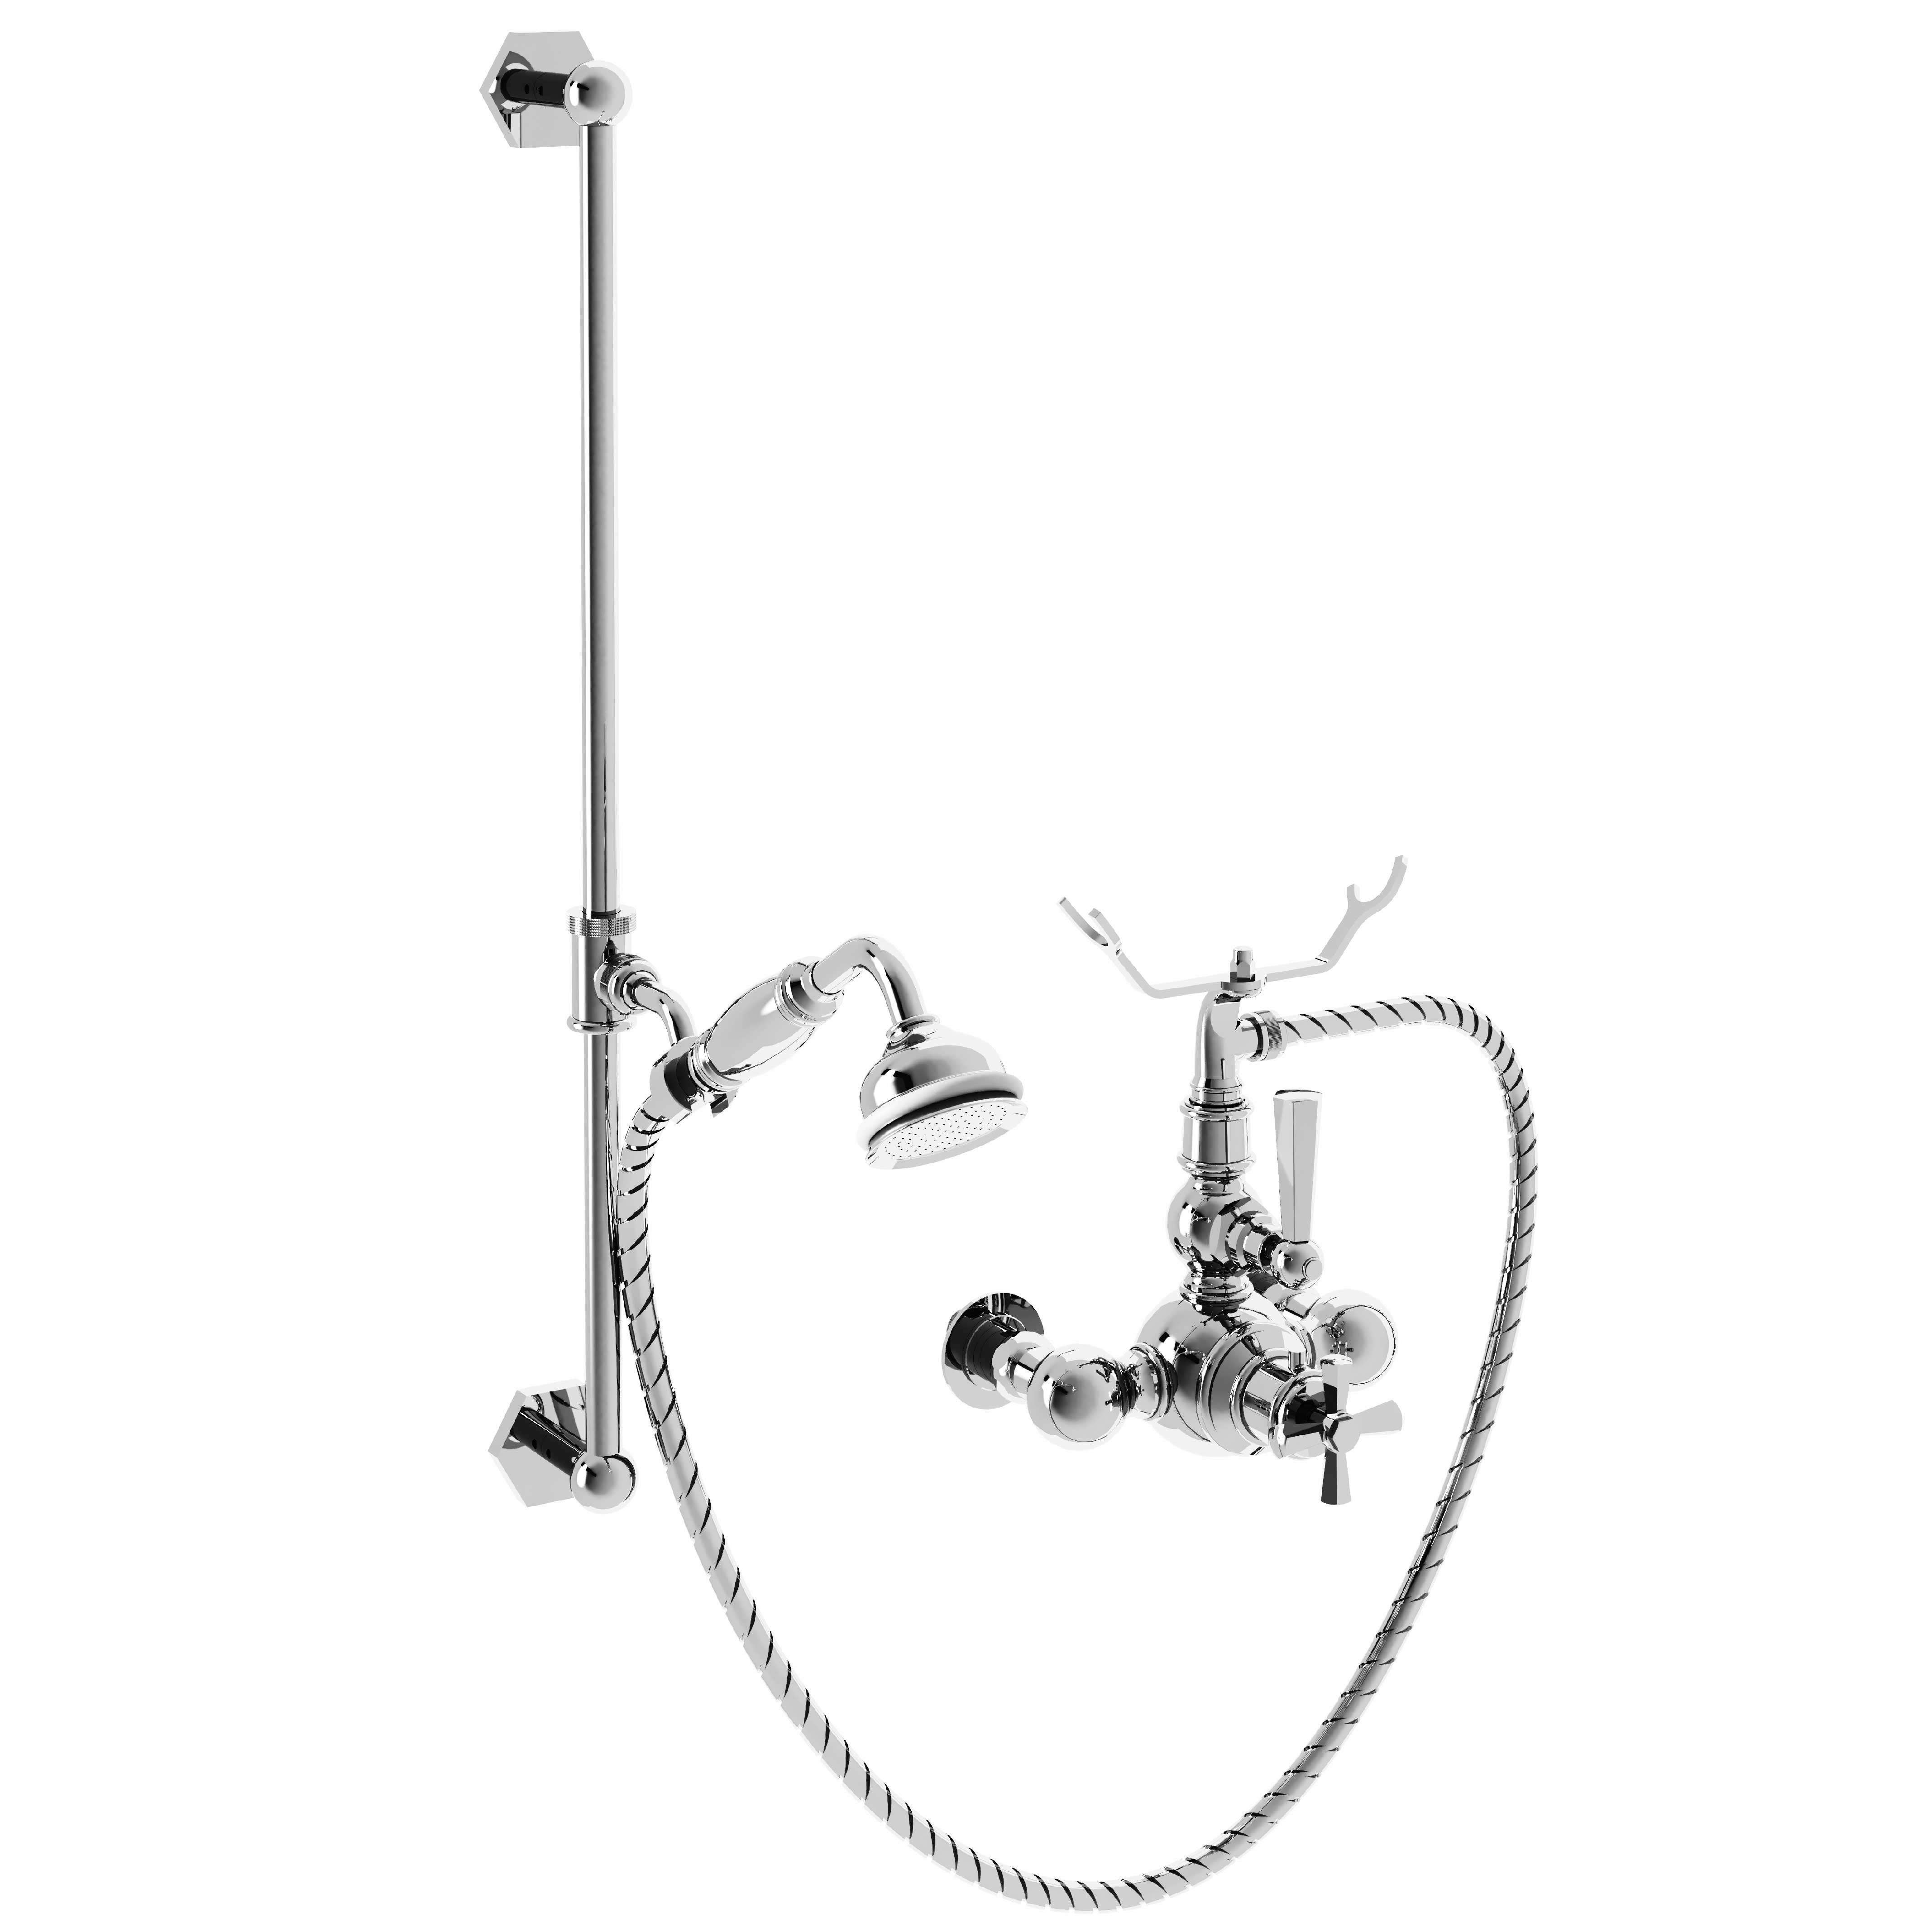 M38-2202T Thermo. shower mixer with sliding bar